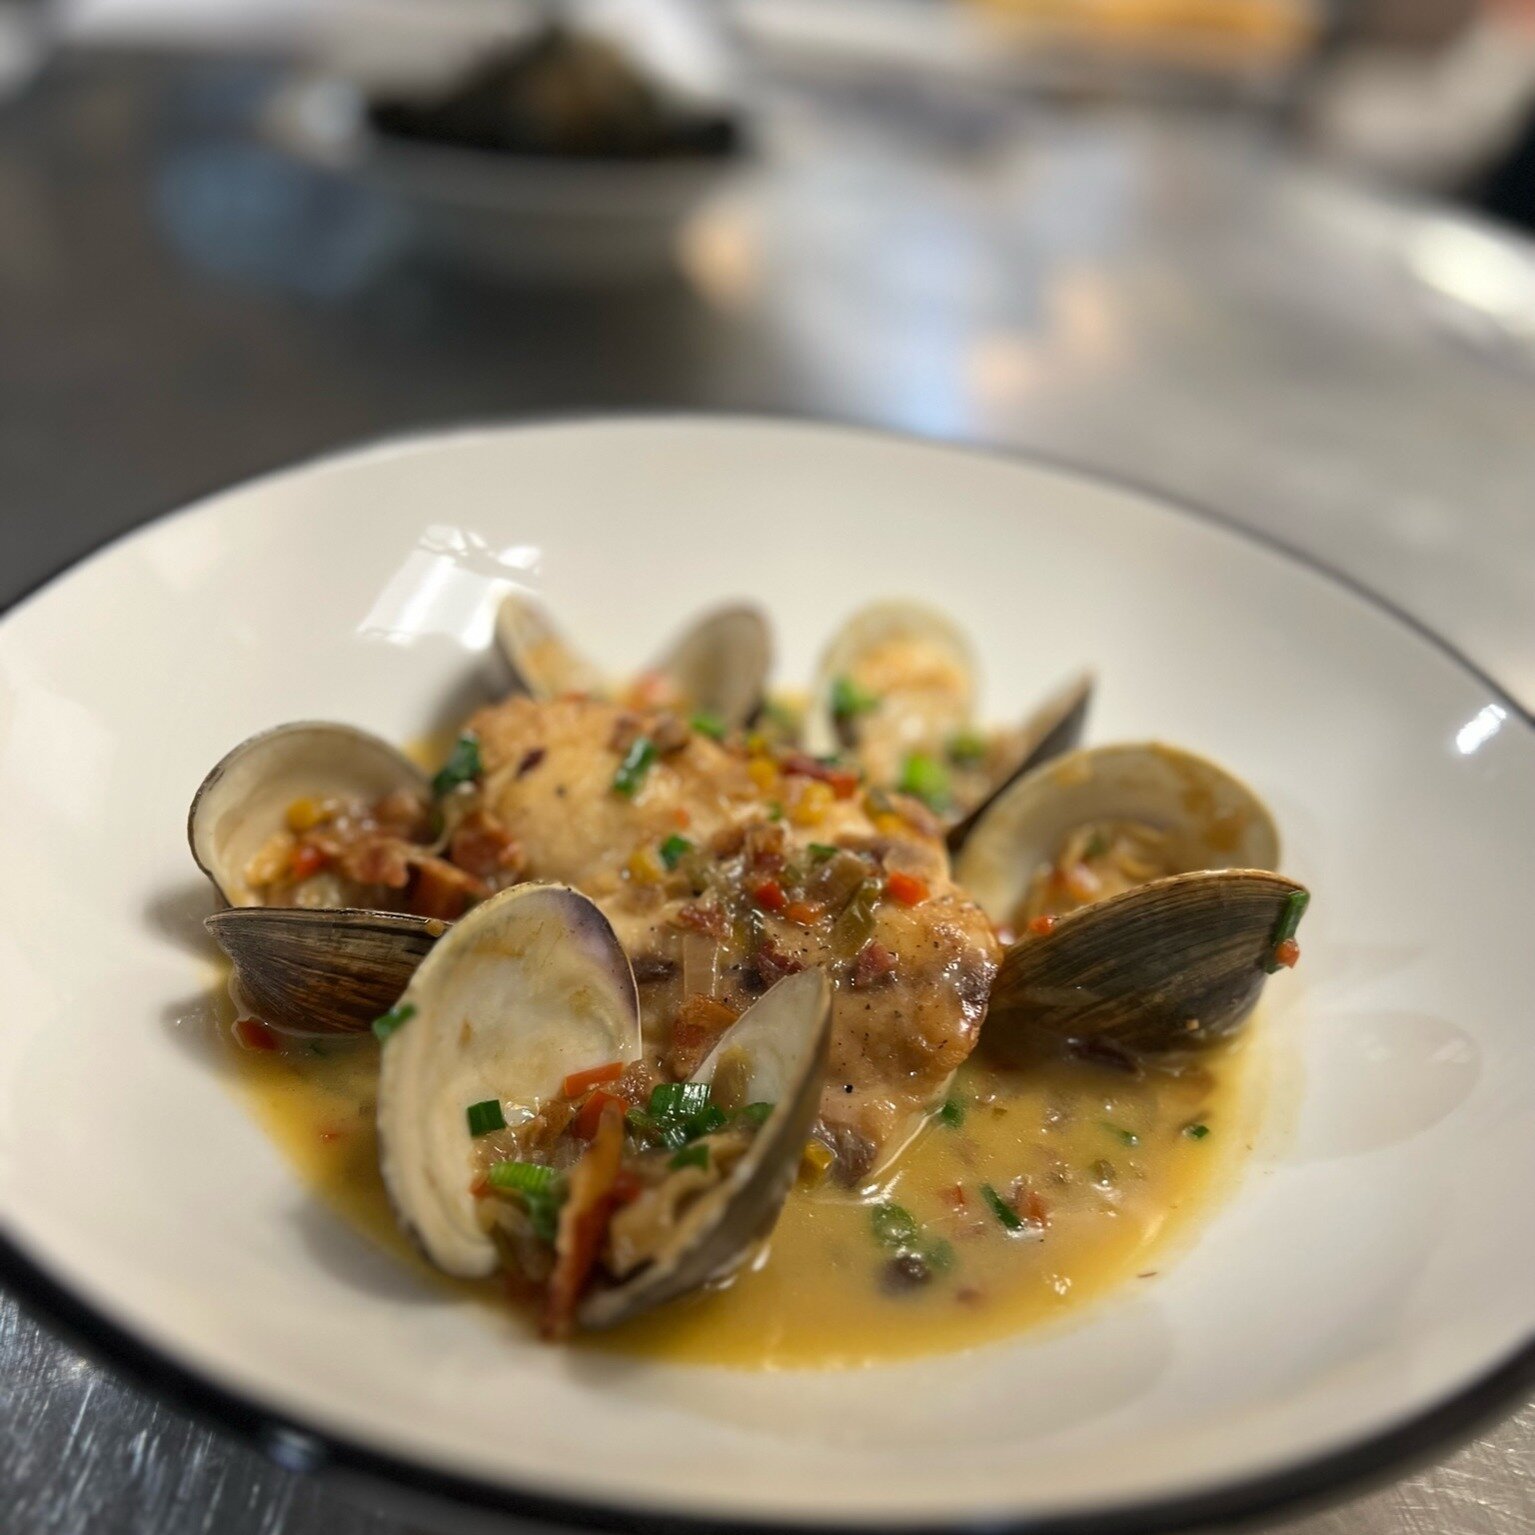 🦀🌊🍺 Come experience the tastes of Maryland this March at Peninsula Prime! Our new Maryland-inspired menu specials, curated by owner Linda Galdieri, bring the flavors of the Chesapeake Bay to your plate. Don't miss out on our Kent Island Crispers a